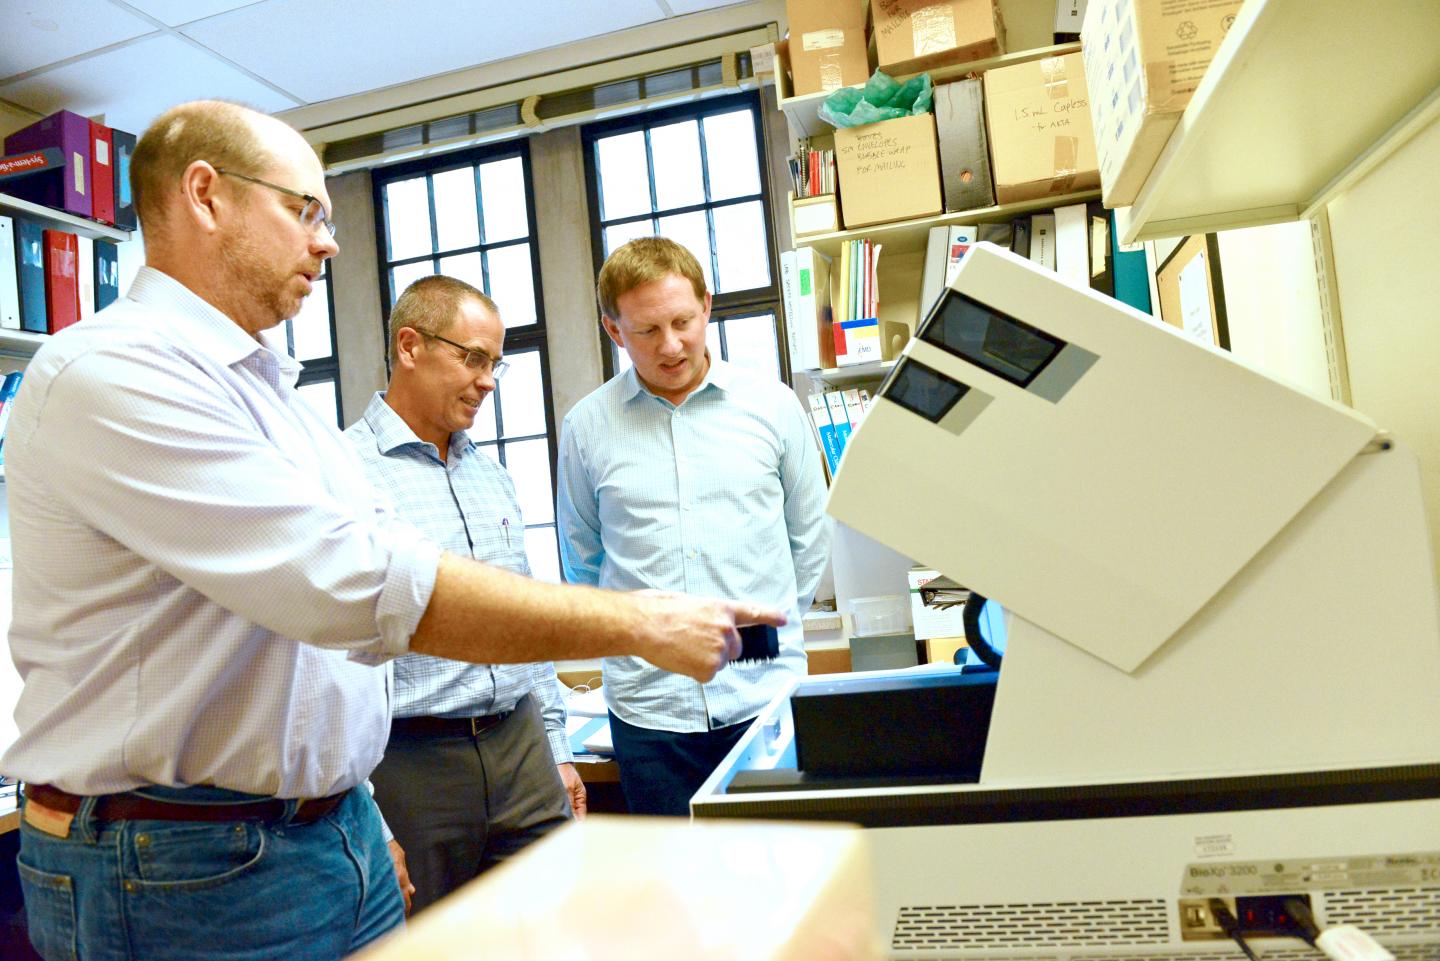 Researchers in the Lab at Western University